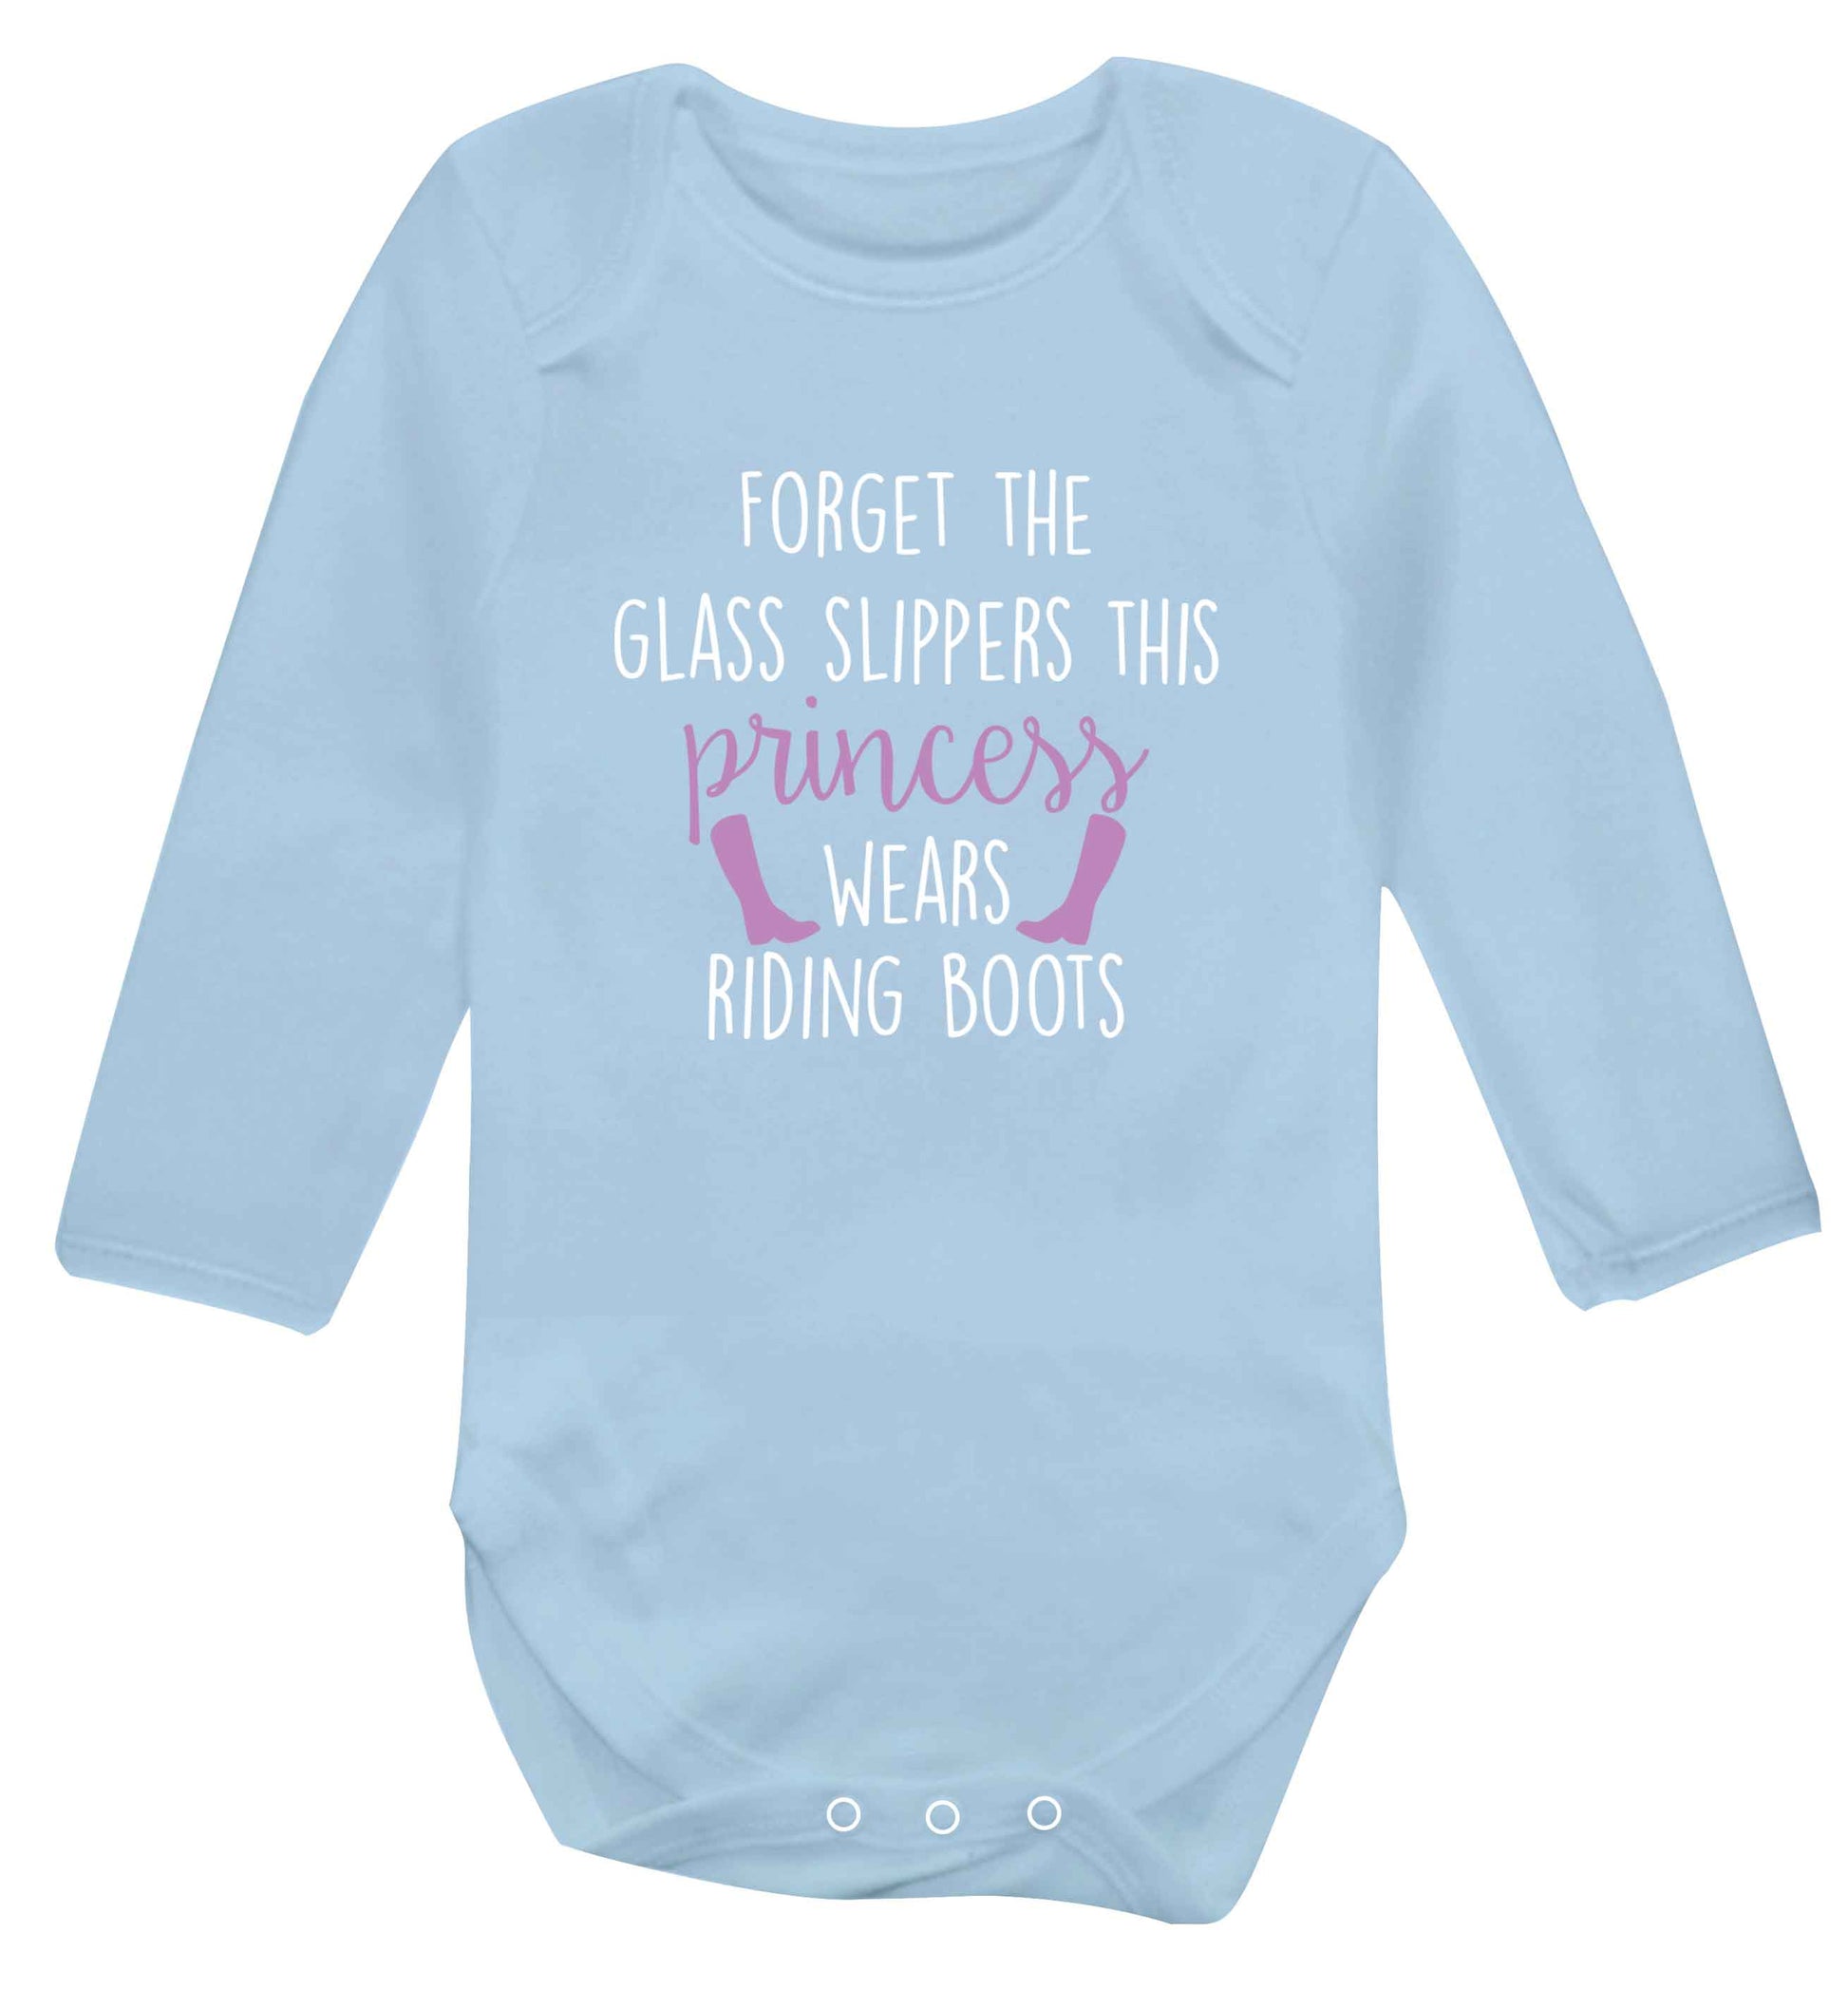 Forget the glass slippers this princess wears riding boots baby vest long sleeved pale blue 6-12 months